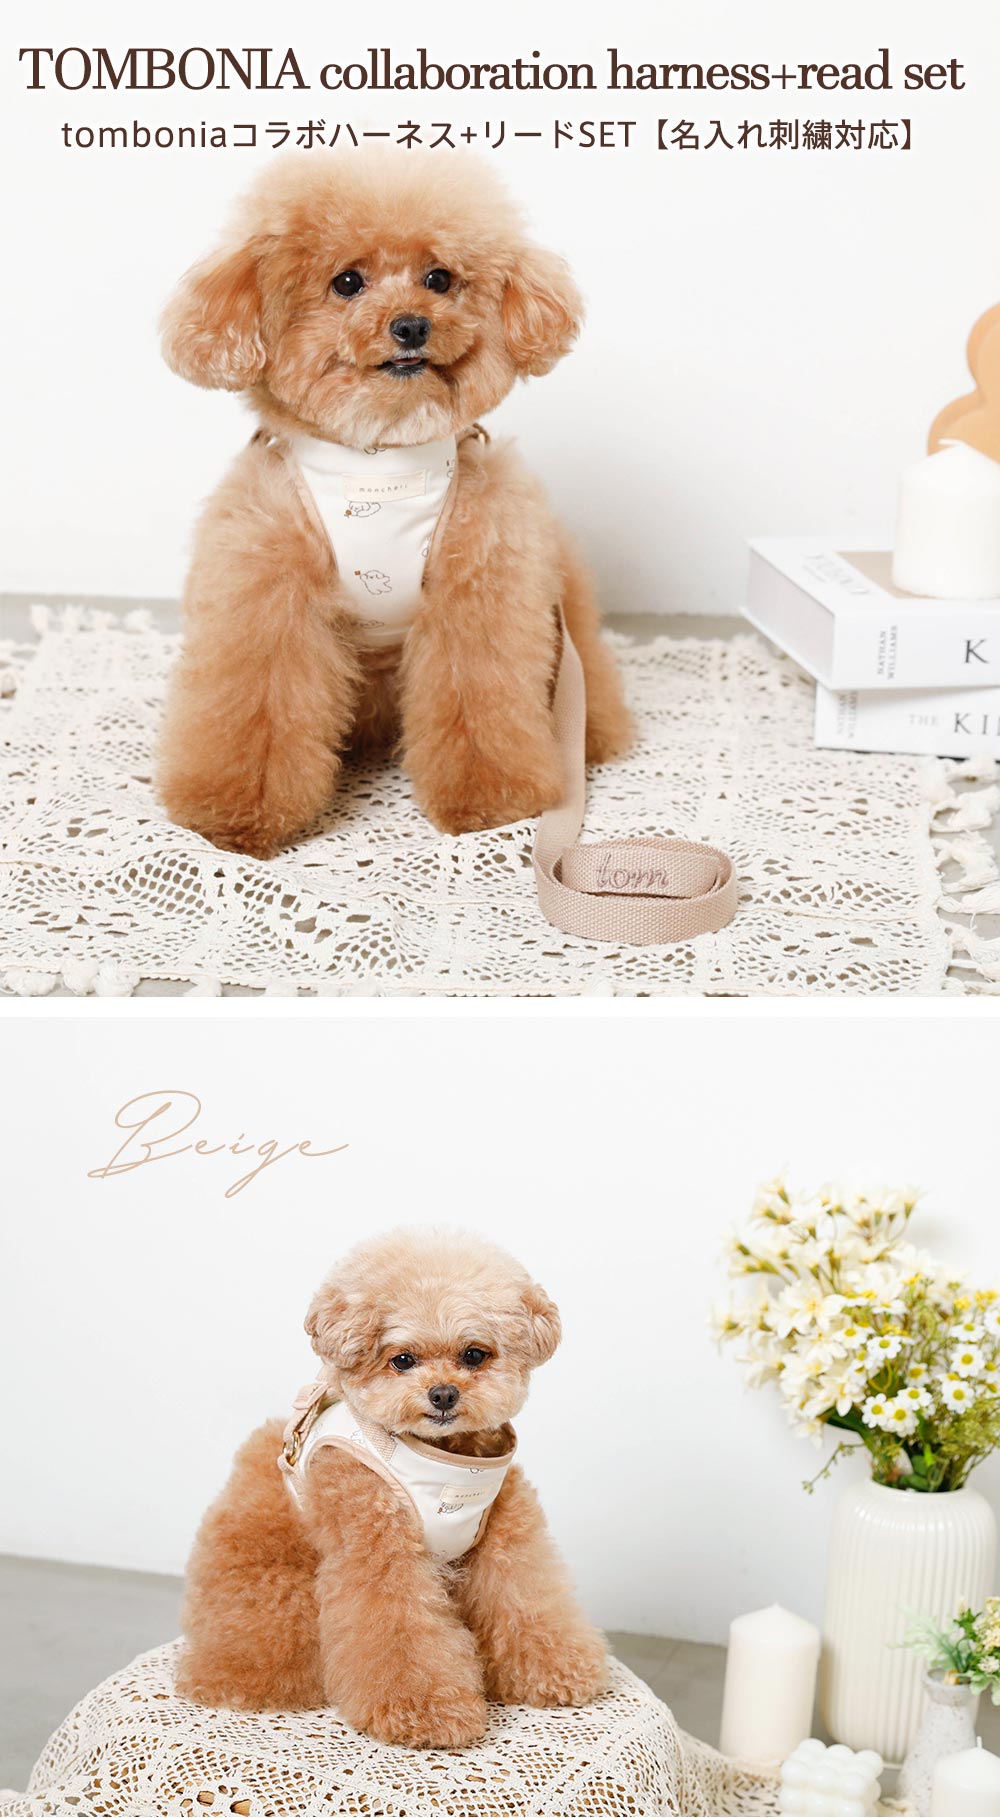 TOMBONIA/Tombonia/Collaboration/Harness/Name Embroidery/Small Dog/Poodle/Thumbnail